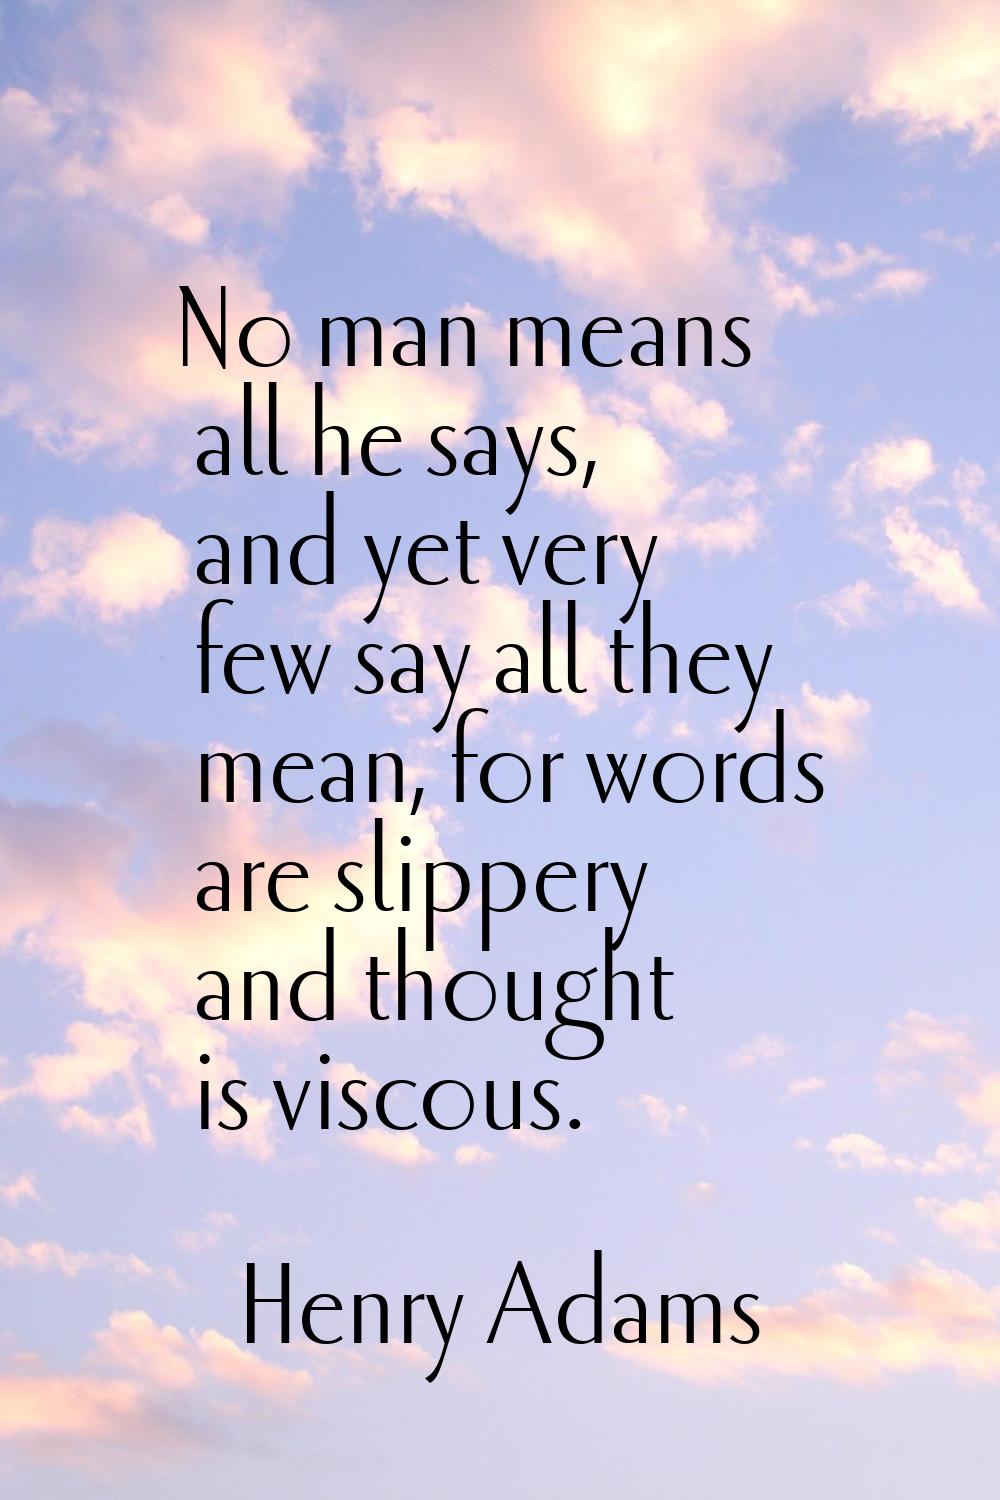 No man means all he says, and yet very few say all they mean, for words are slippery and thought is